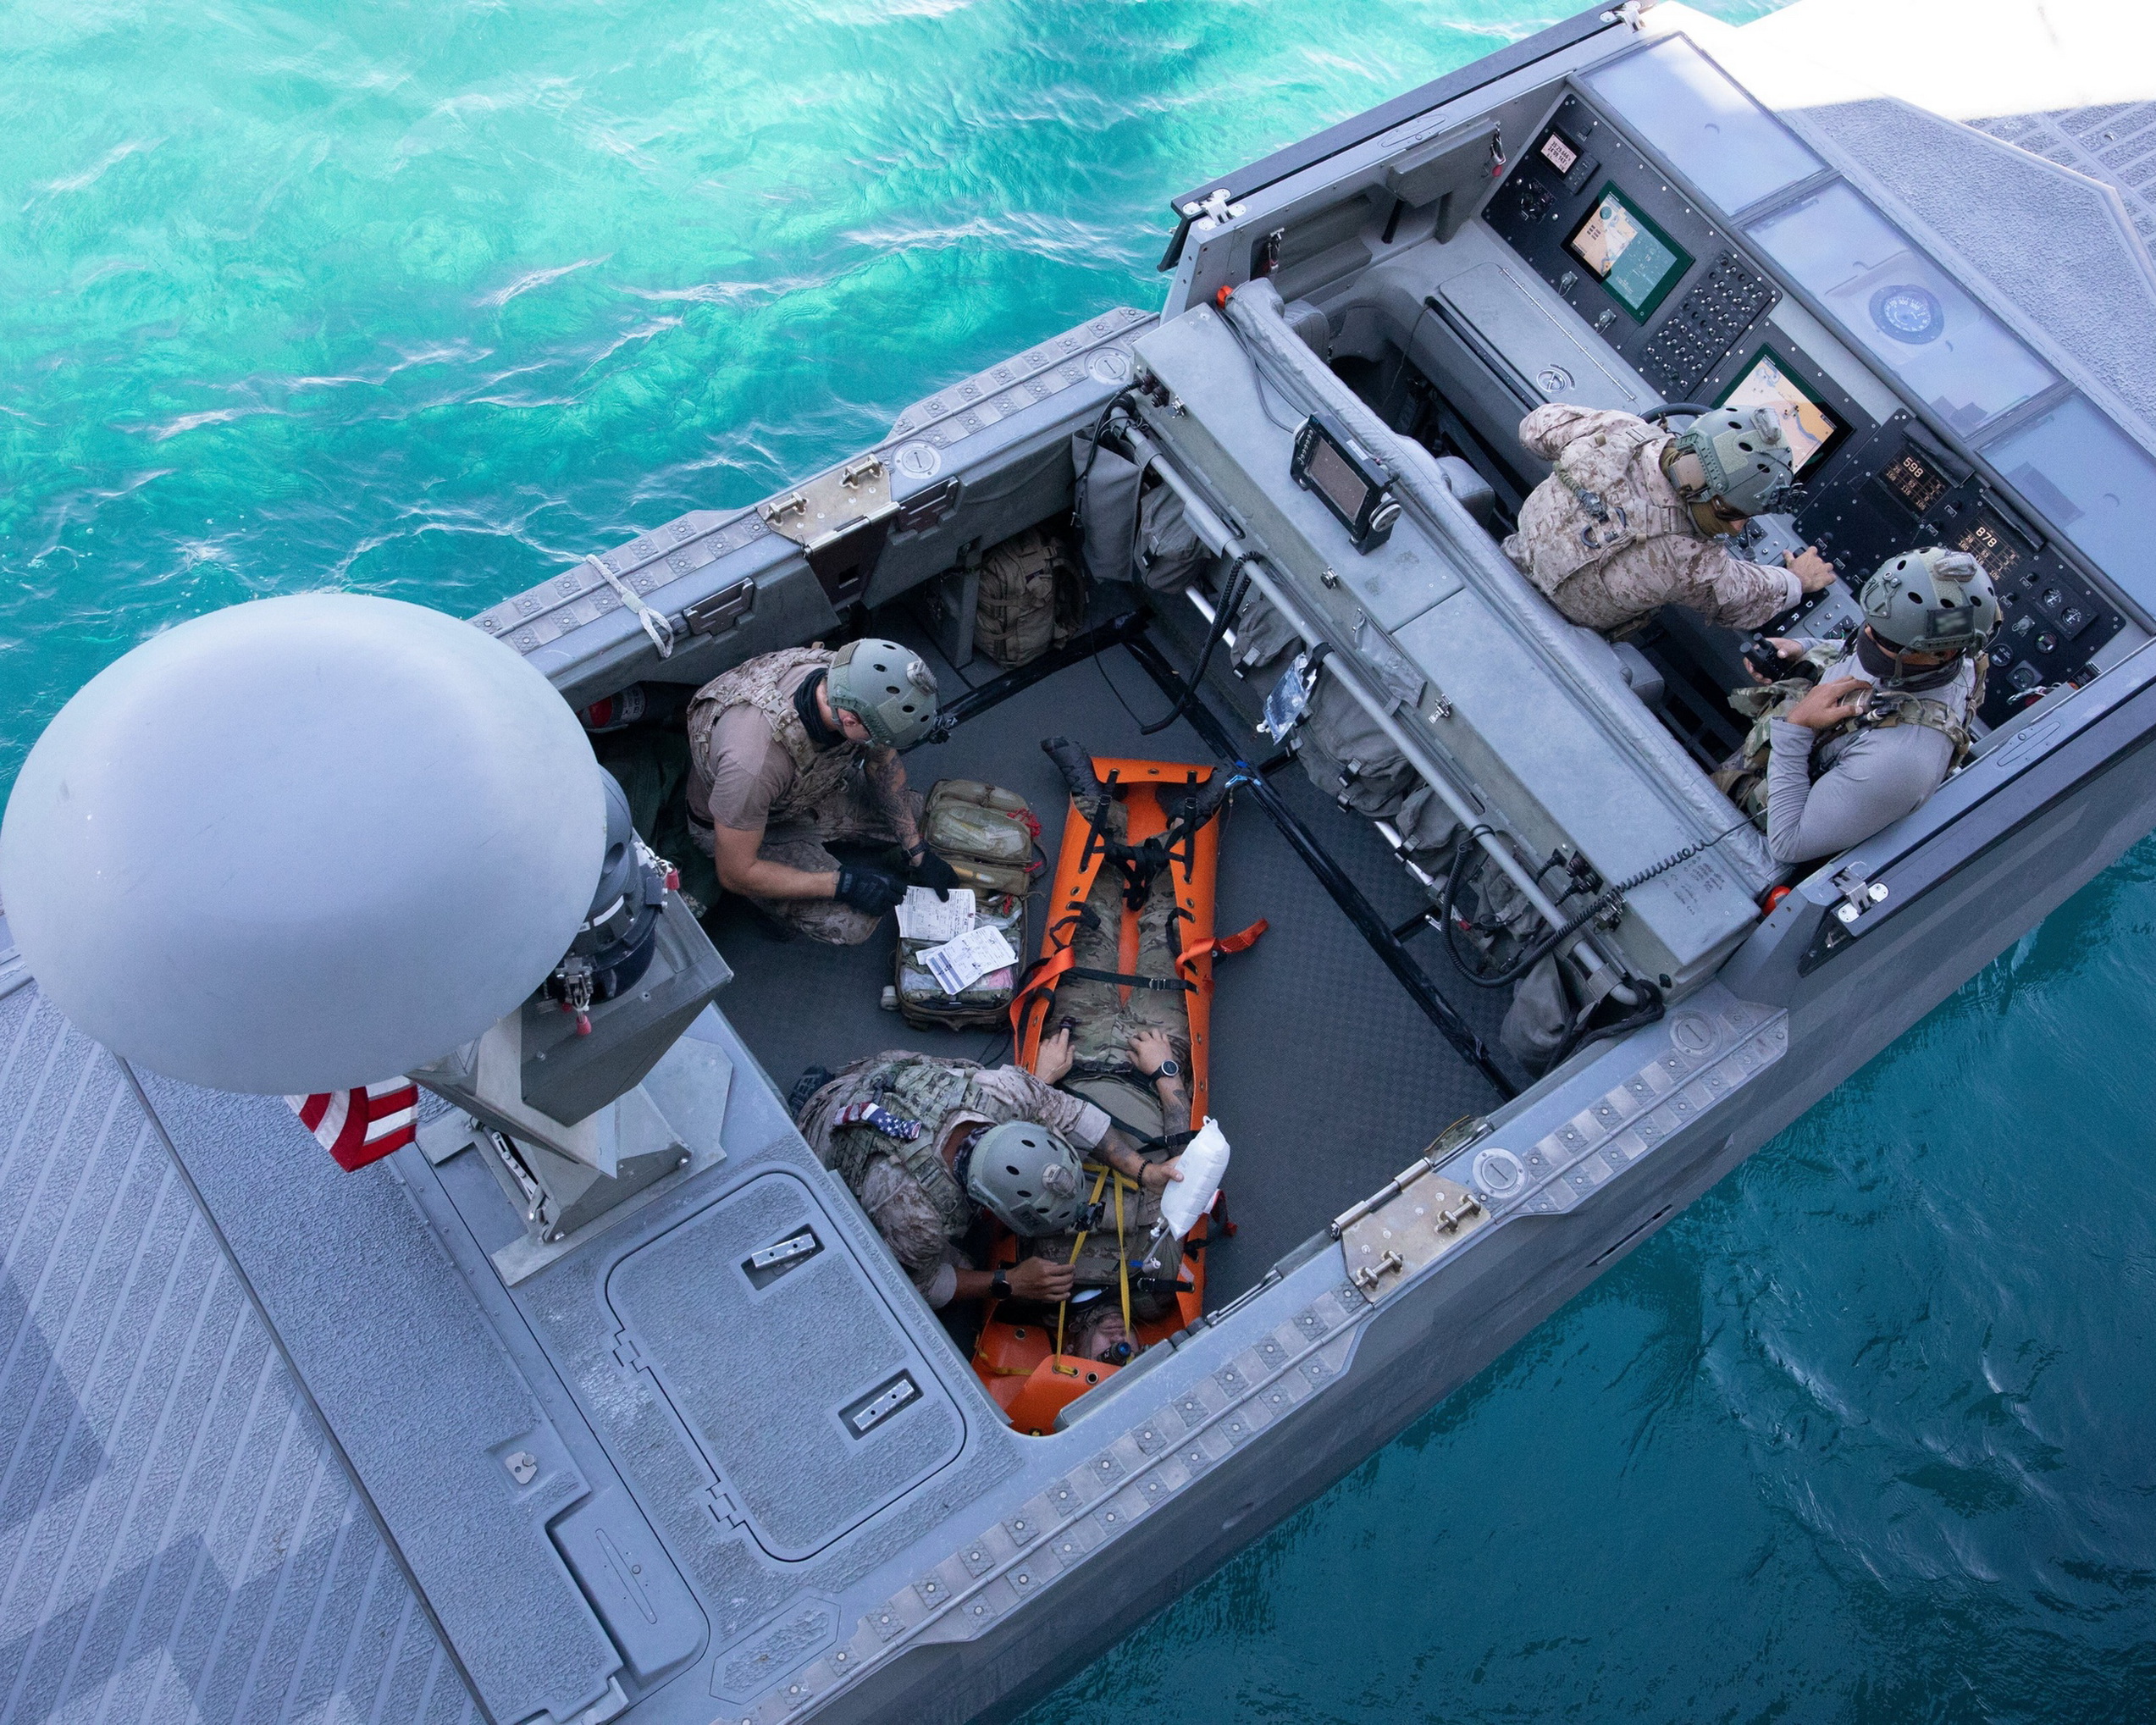 Visit, Board, Search and Seizure (VBSS), Greece, 31 July 2020